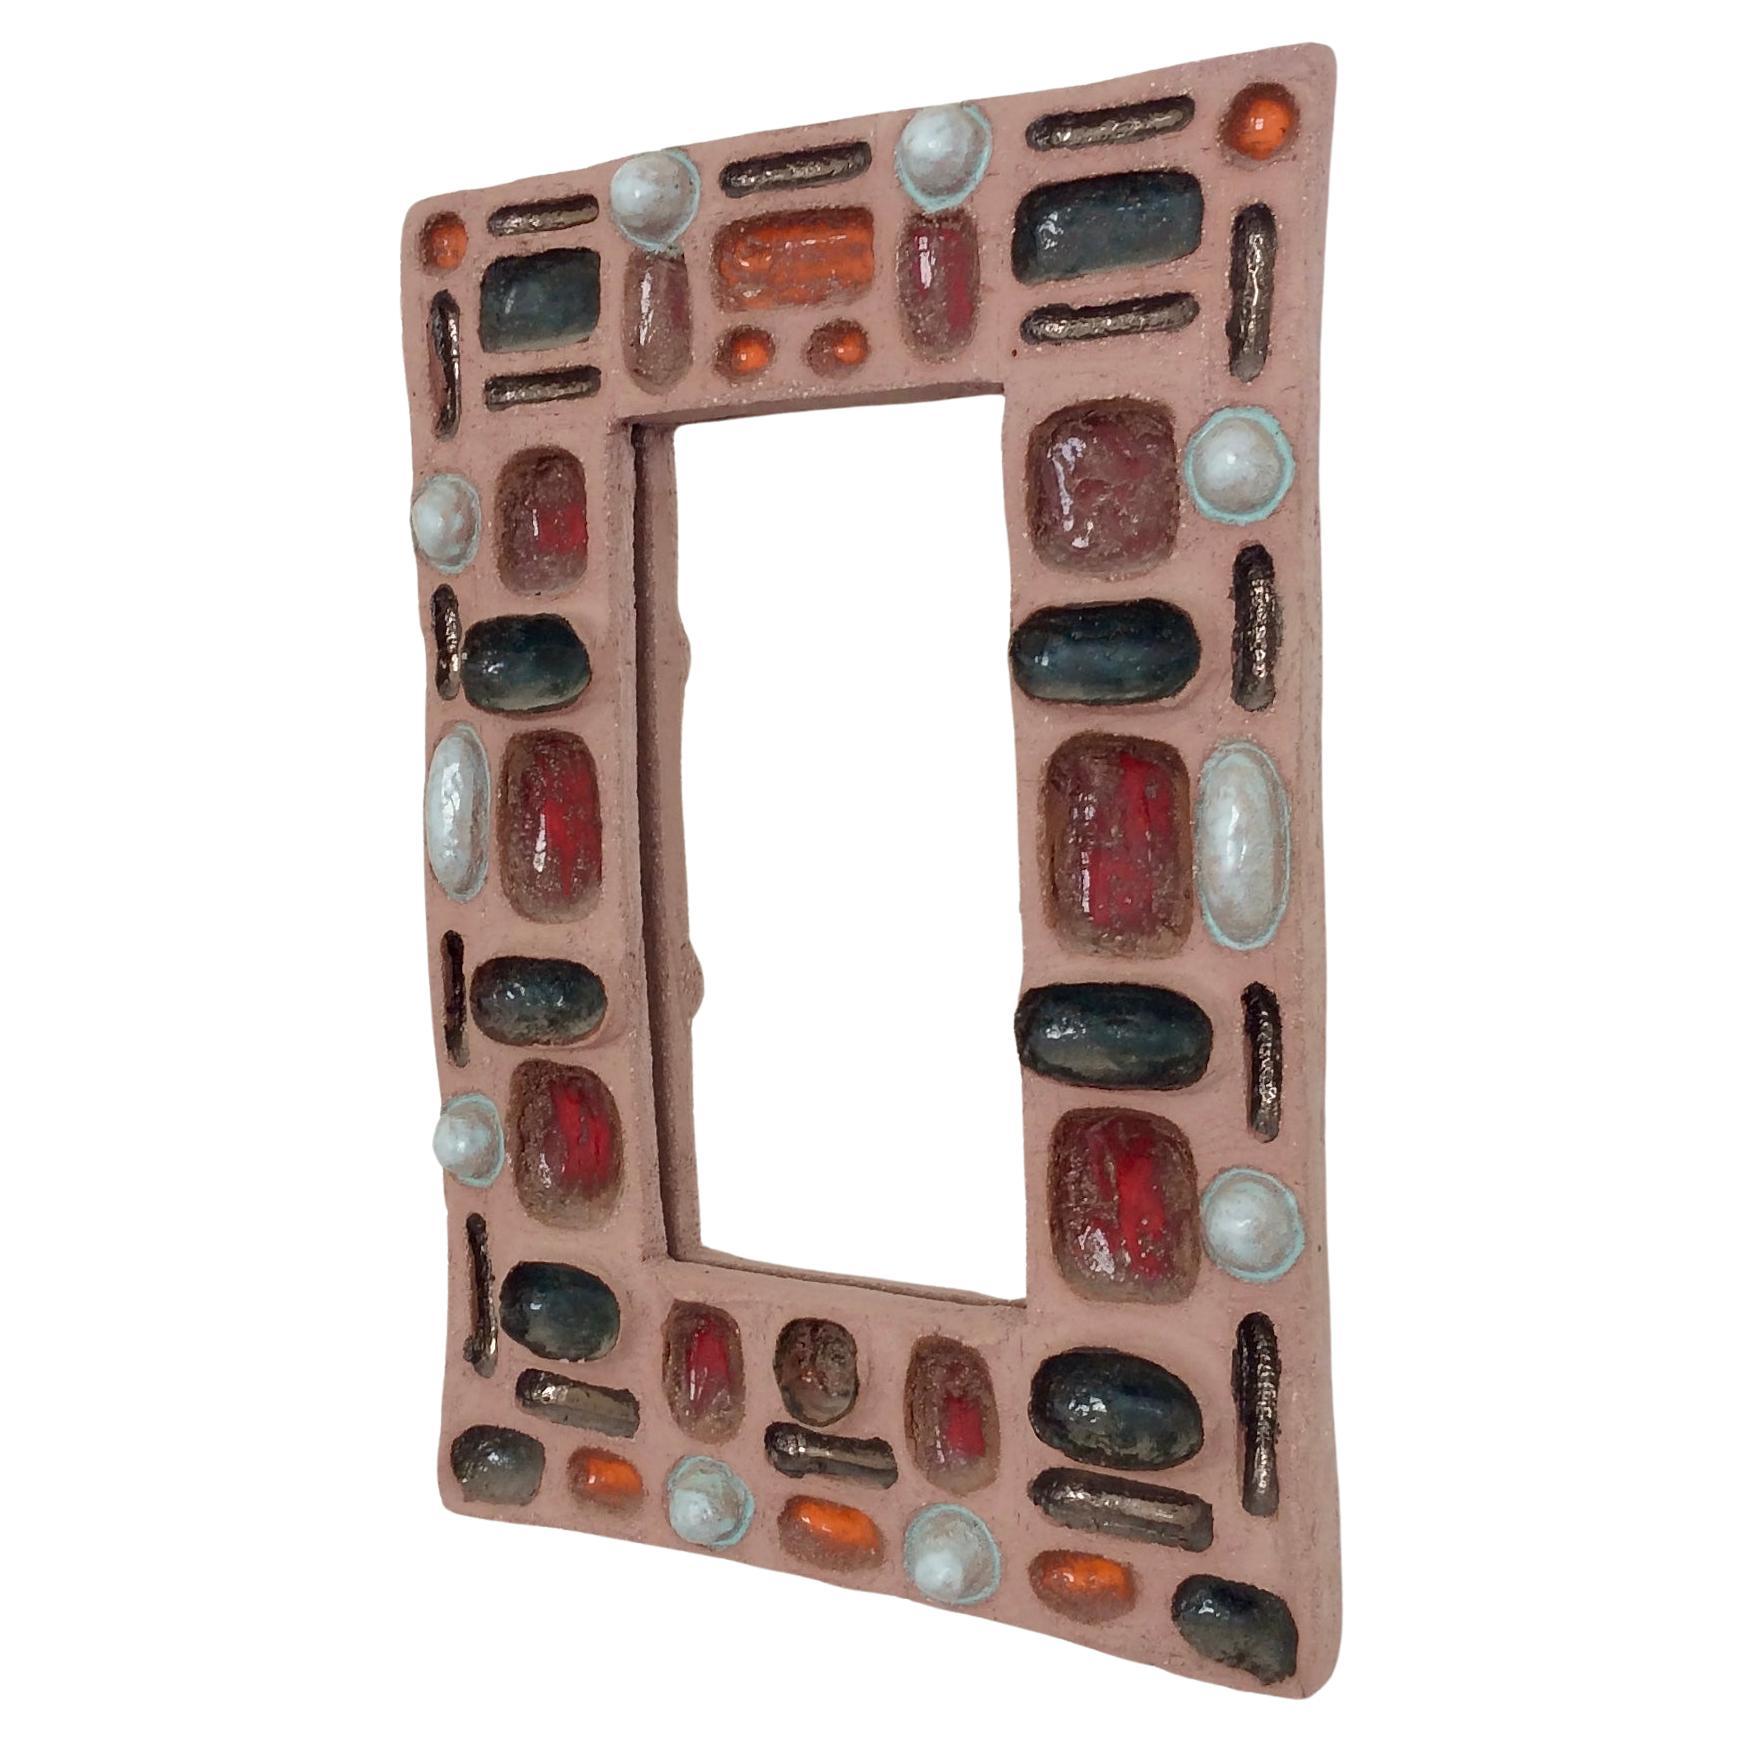 Nice abstract composition ceramic mirror, circa 1960, France.
Thick raw sandstone with enameled polychrome decor, hollowed or embossed.
Dimensions: 34 cm W, 48 cm H, 4 cm D.
Good original condition. Rare item.
All purchases are covered by our Buyer